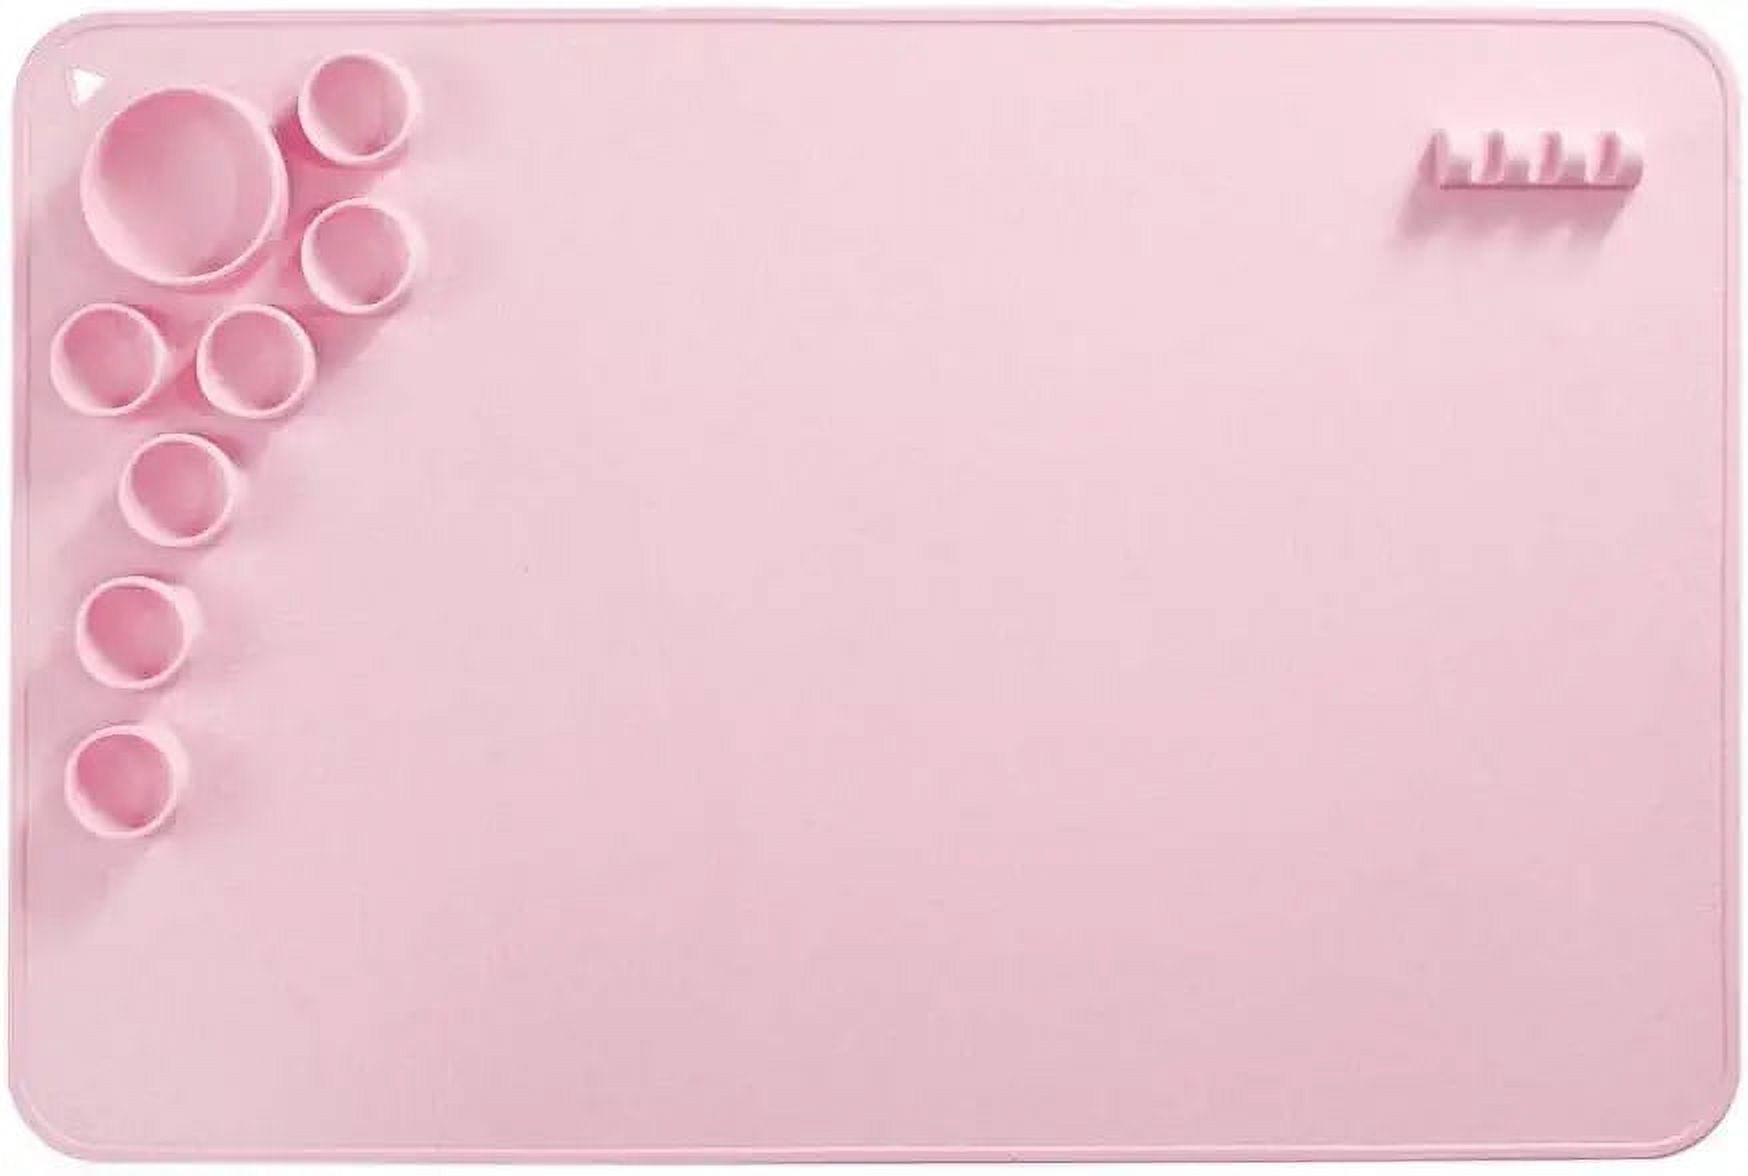 Nogis Silicone Craft Mat,Silicone Painting Mat, 23.6 inch15.7 inch Non Stick Silicone Sheet,Silicone Mat for Resin Casting, Silicone Craft Mat for DIY